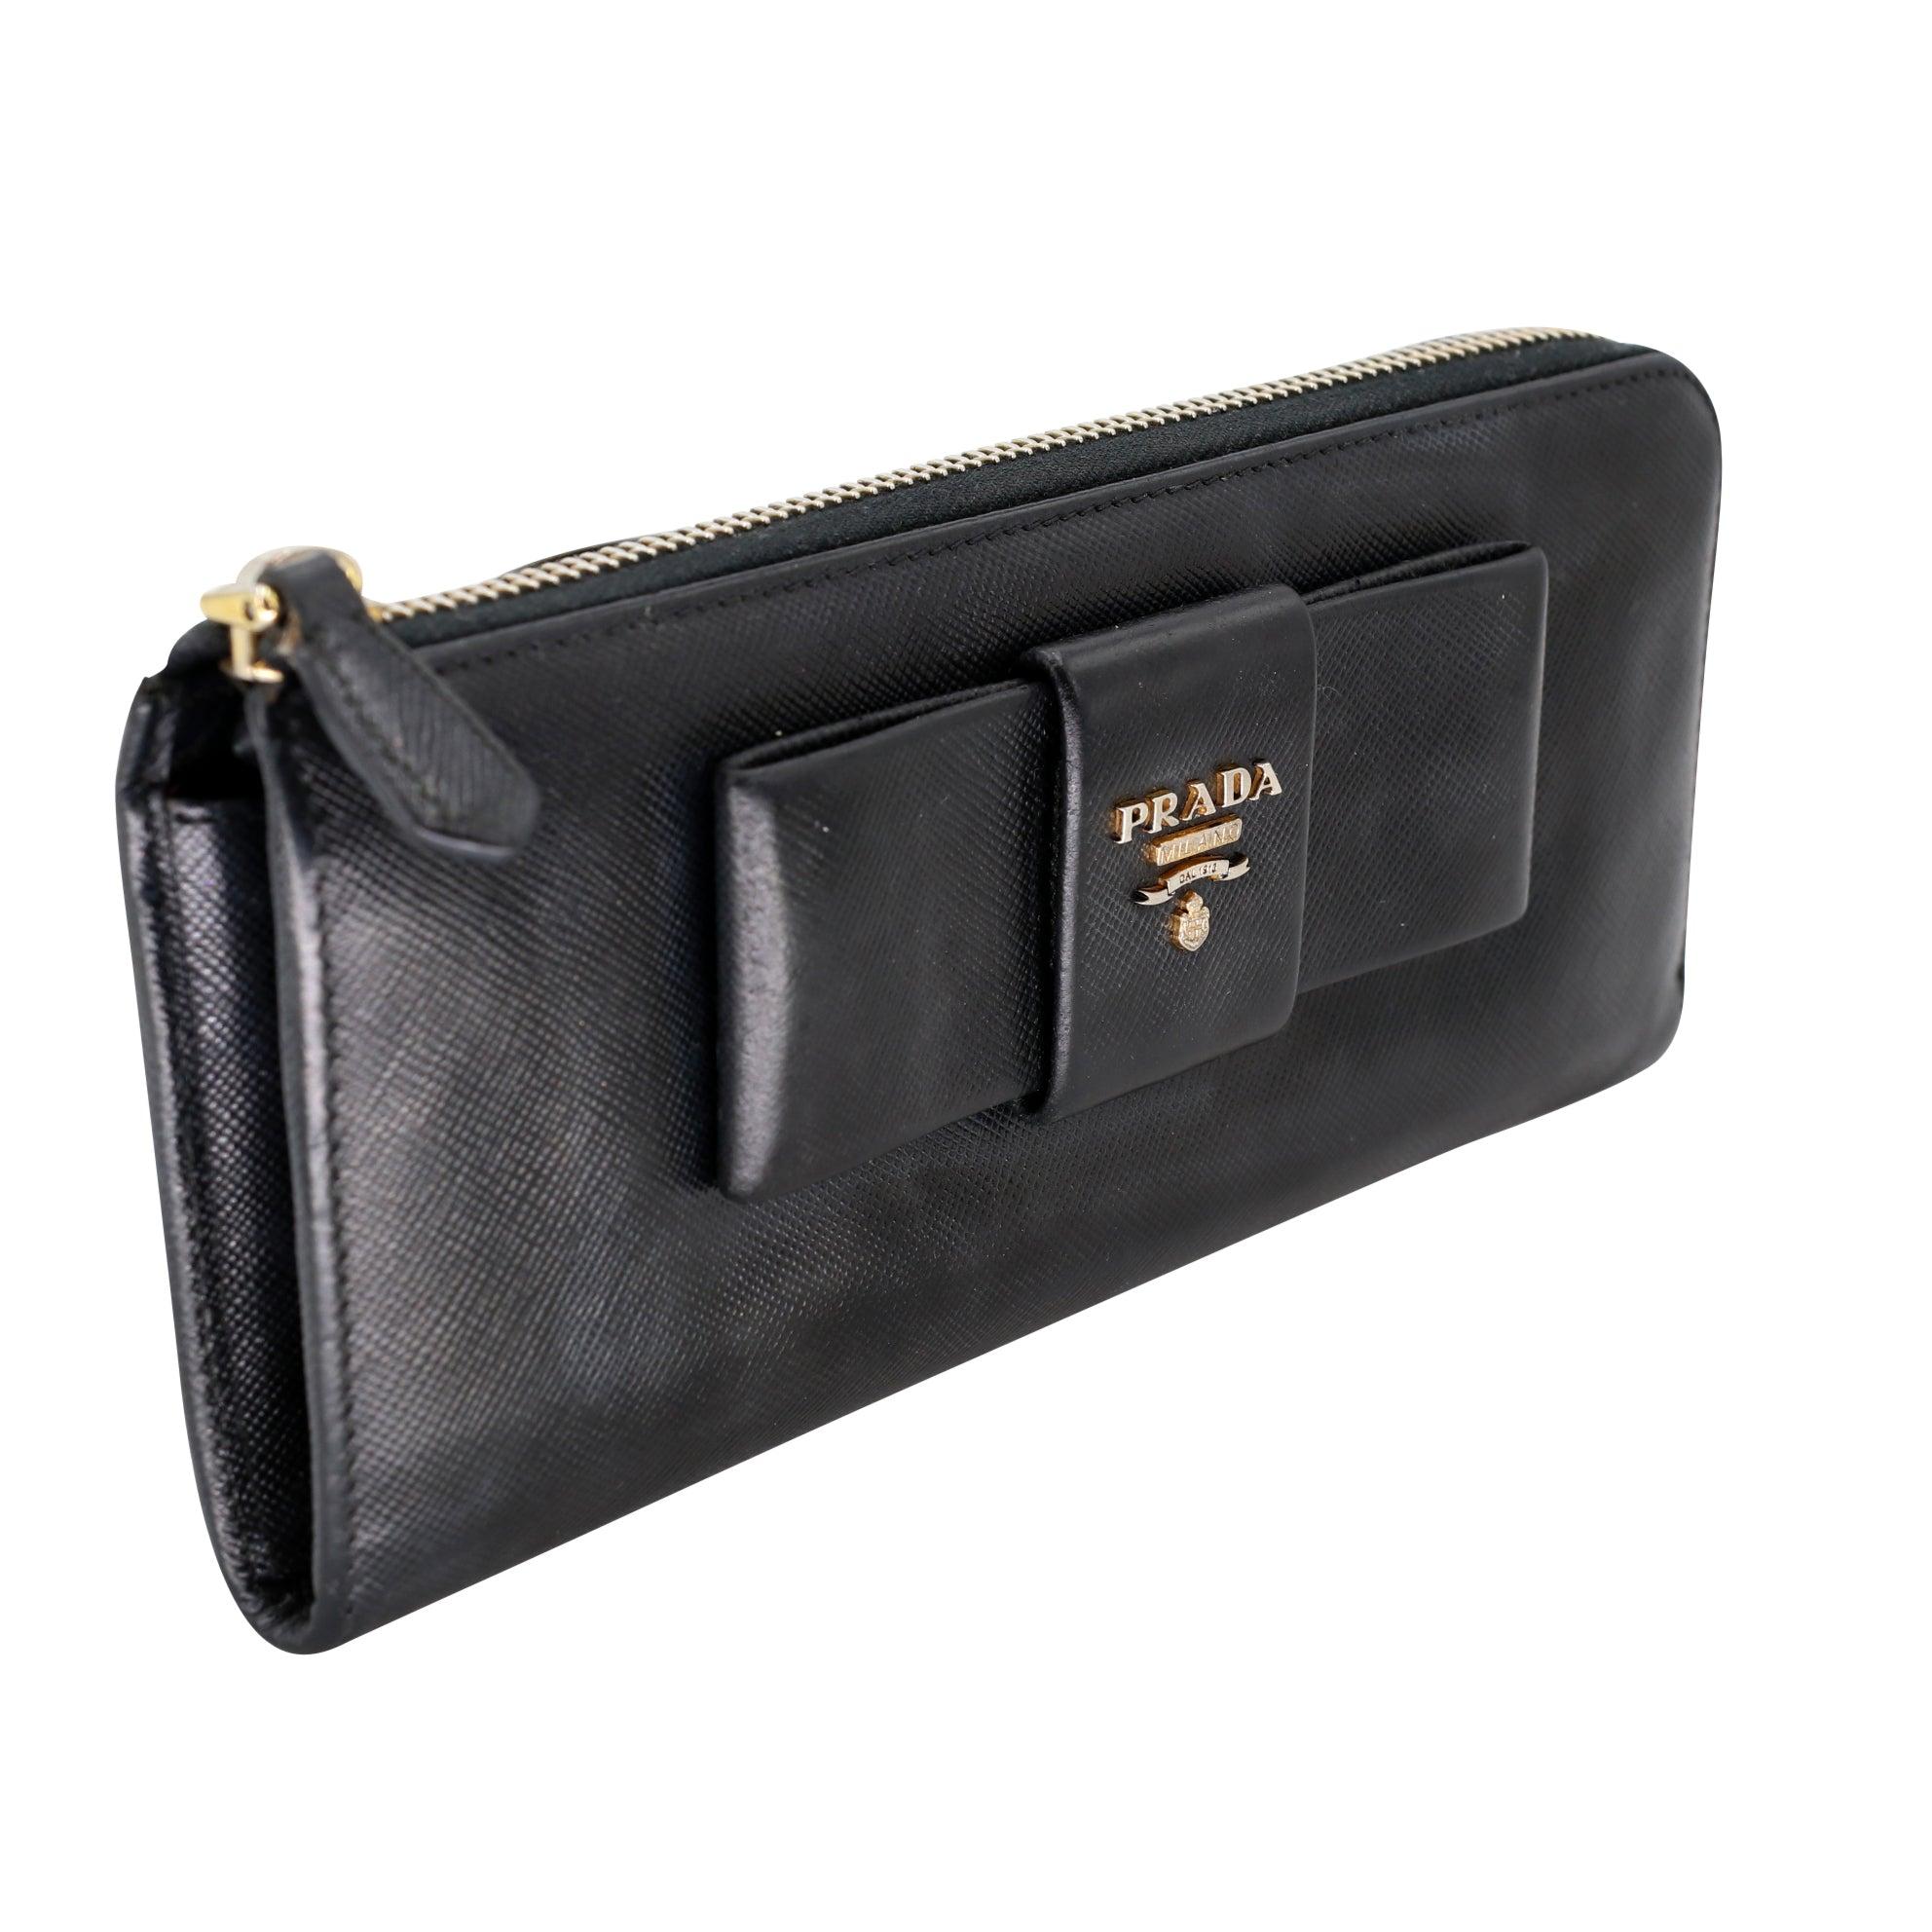 This pre-loved Prada wallet is a great addition to any purse or collection! The saffiano leather is durable and beautiful, and the gold-tone hardware adds a touch of luxury. The full zip around closure keeps everything secure, provides plenty of